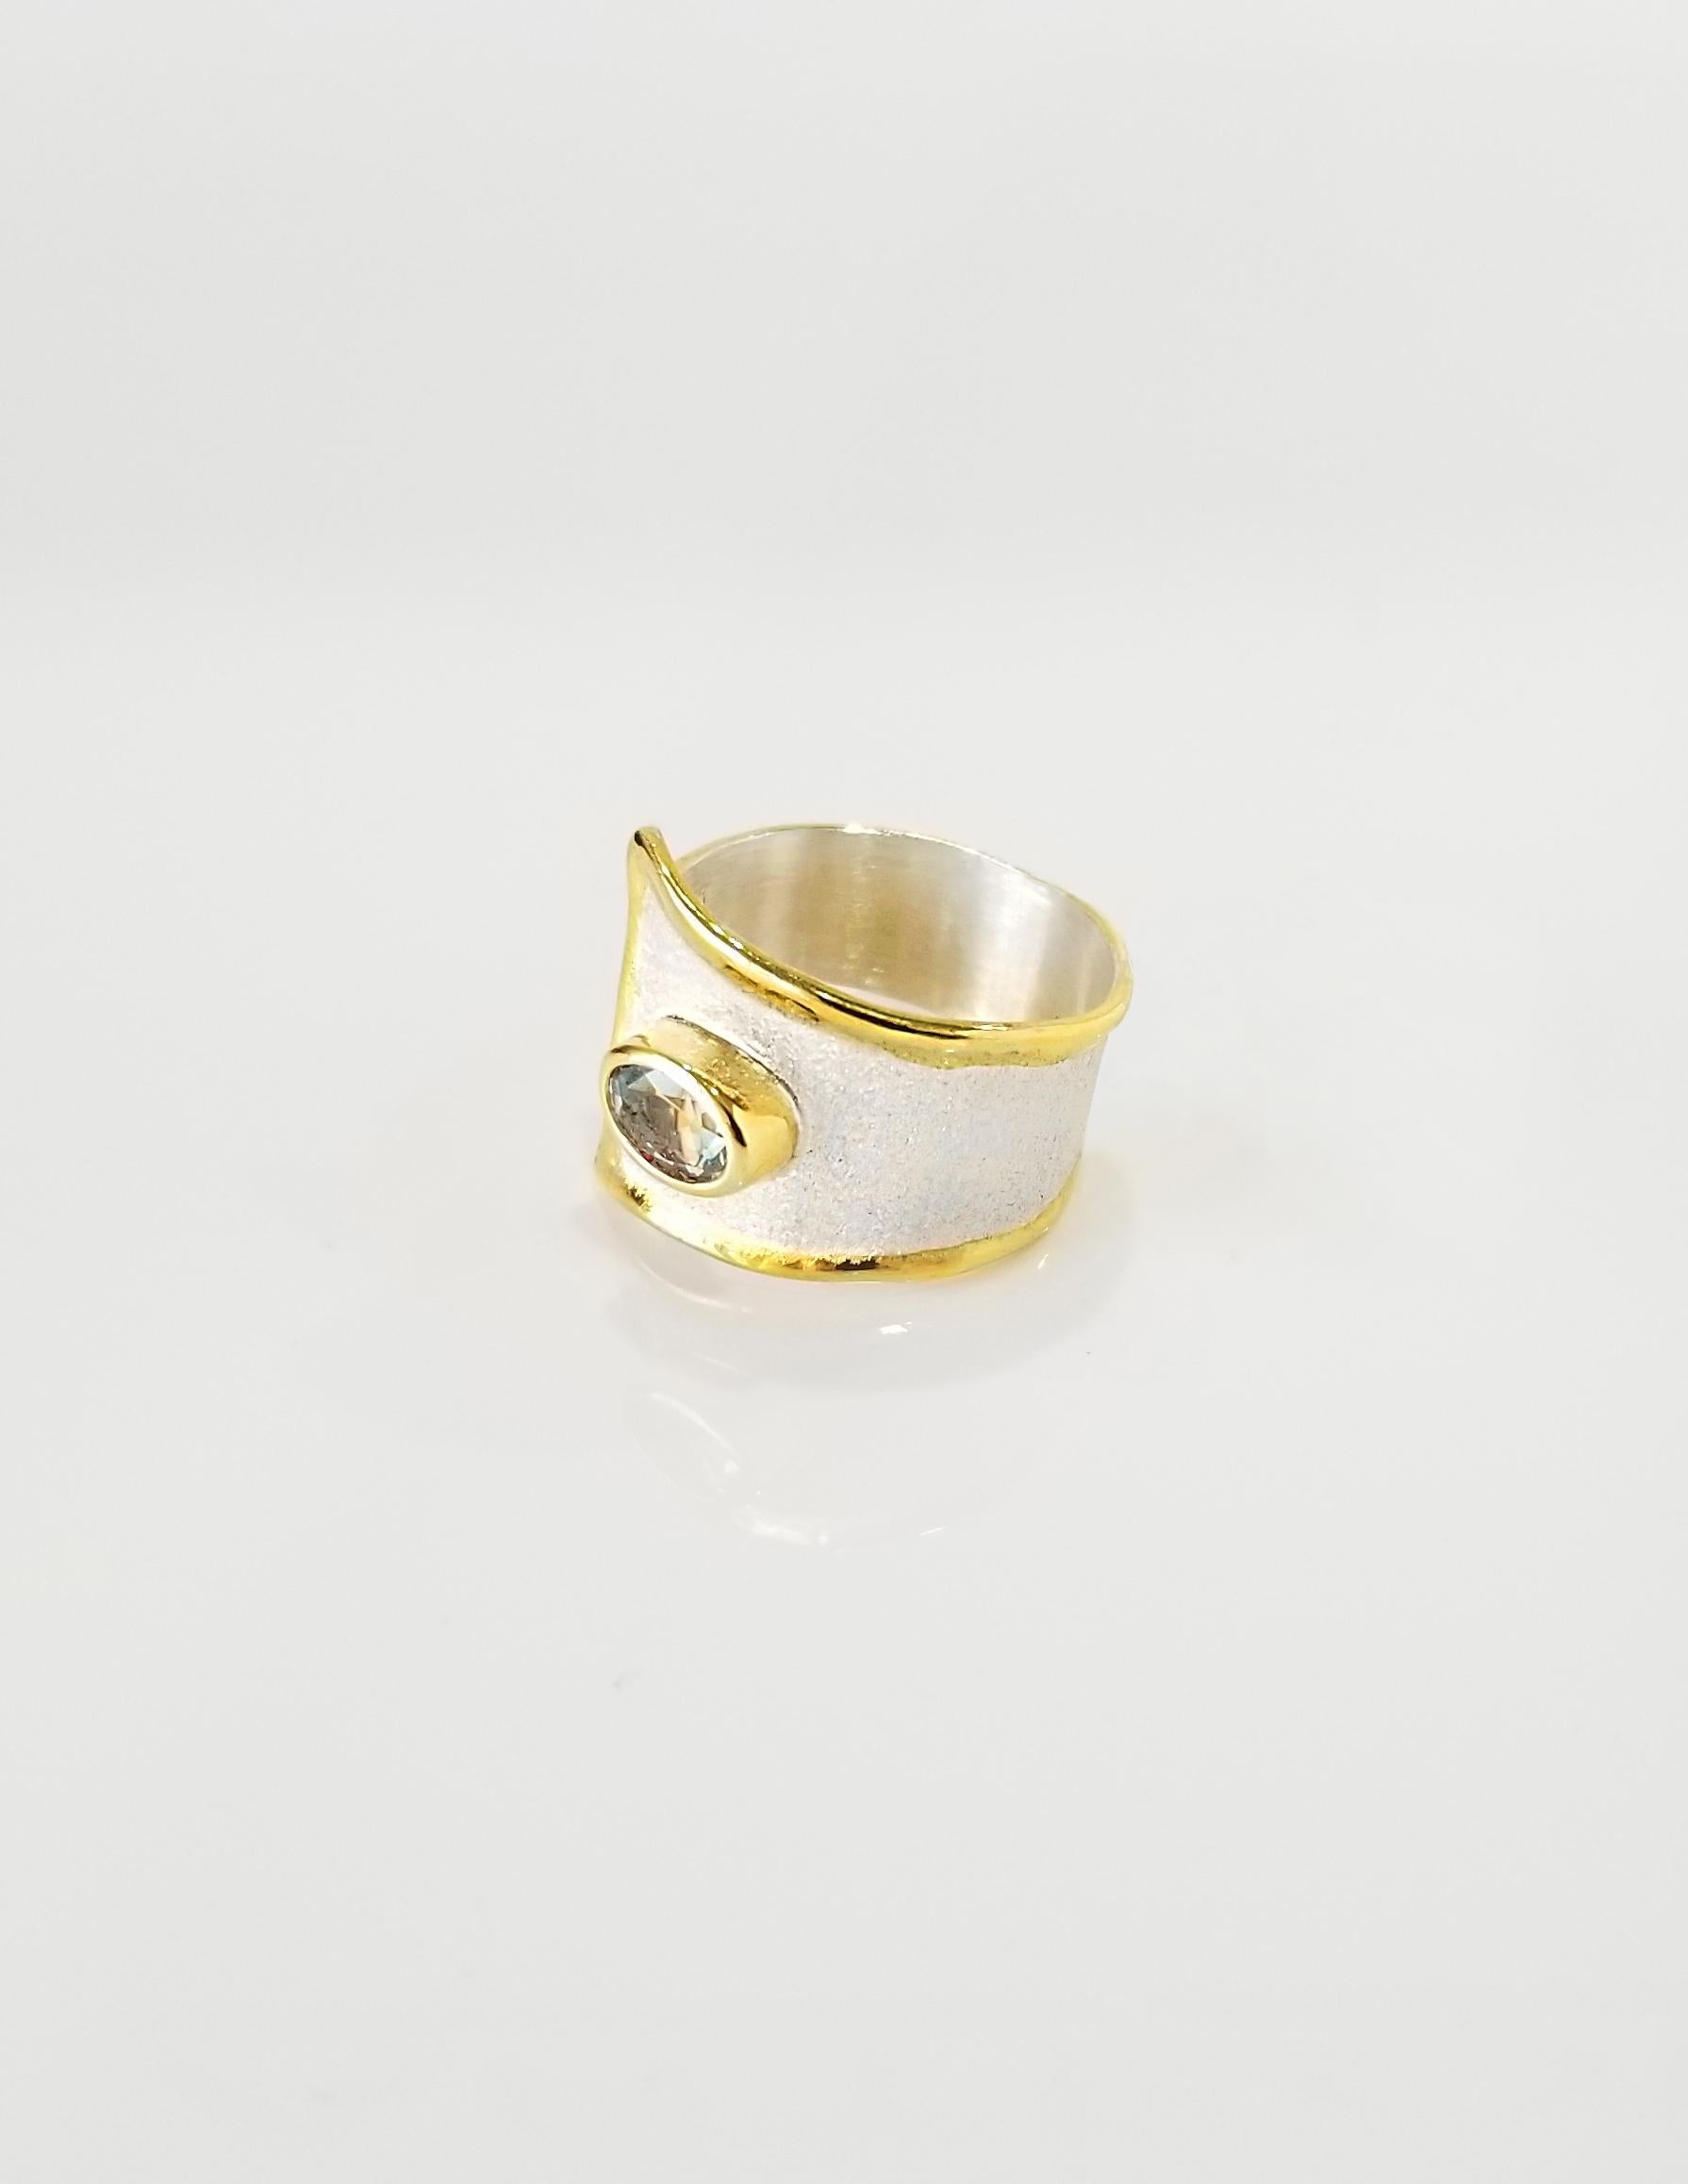 This is Yianni Creations Midas Collection handmade artisan ring from fine silver 950 purity plated with palladium to resist against the elements. Liquid edges are decorated with a thick overlay of 24 karat yellow gold. Ring features 1.10 carat